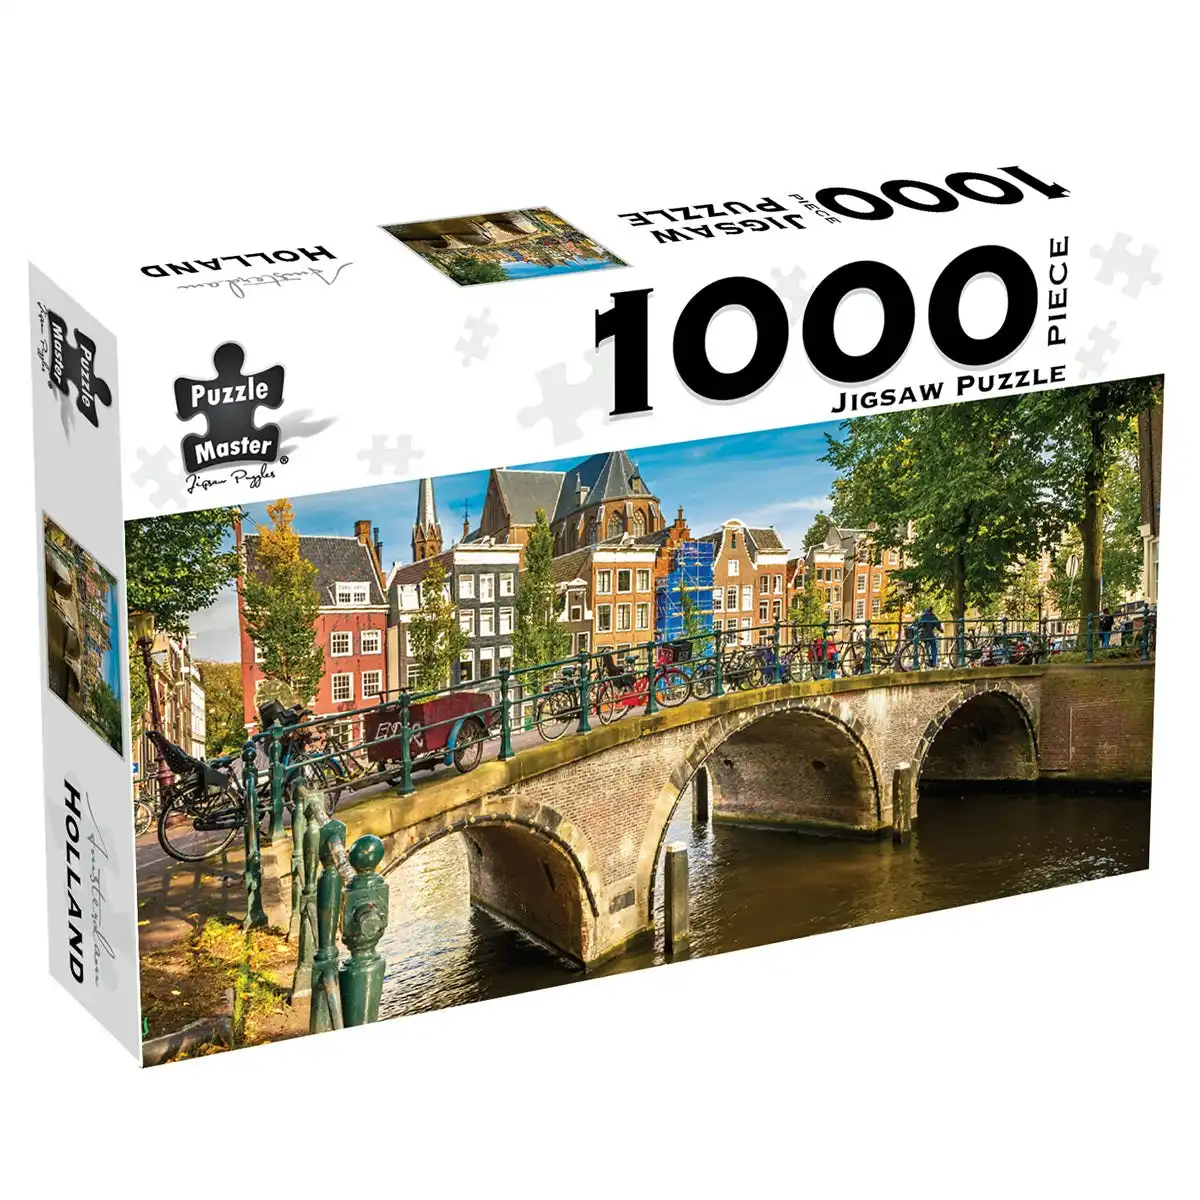 Puzzle Master 1000-Piece Jigsaw Puzzle, Amsterdam, Holland